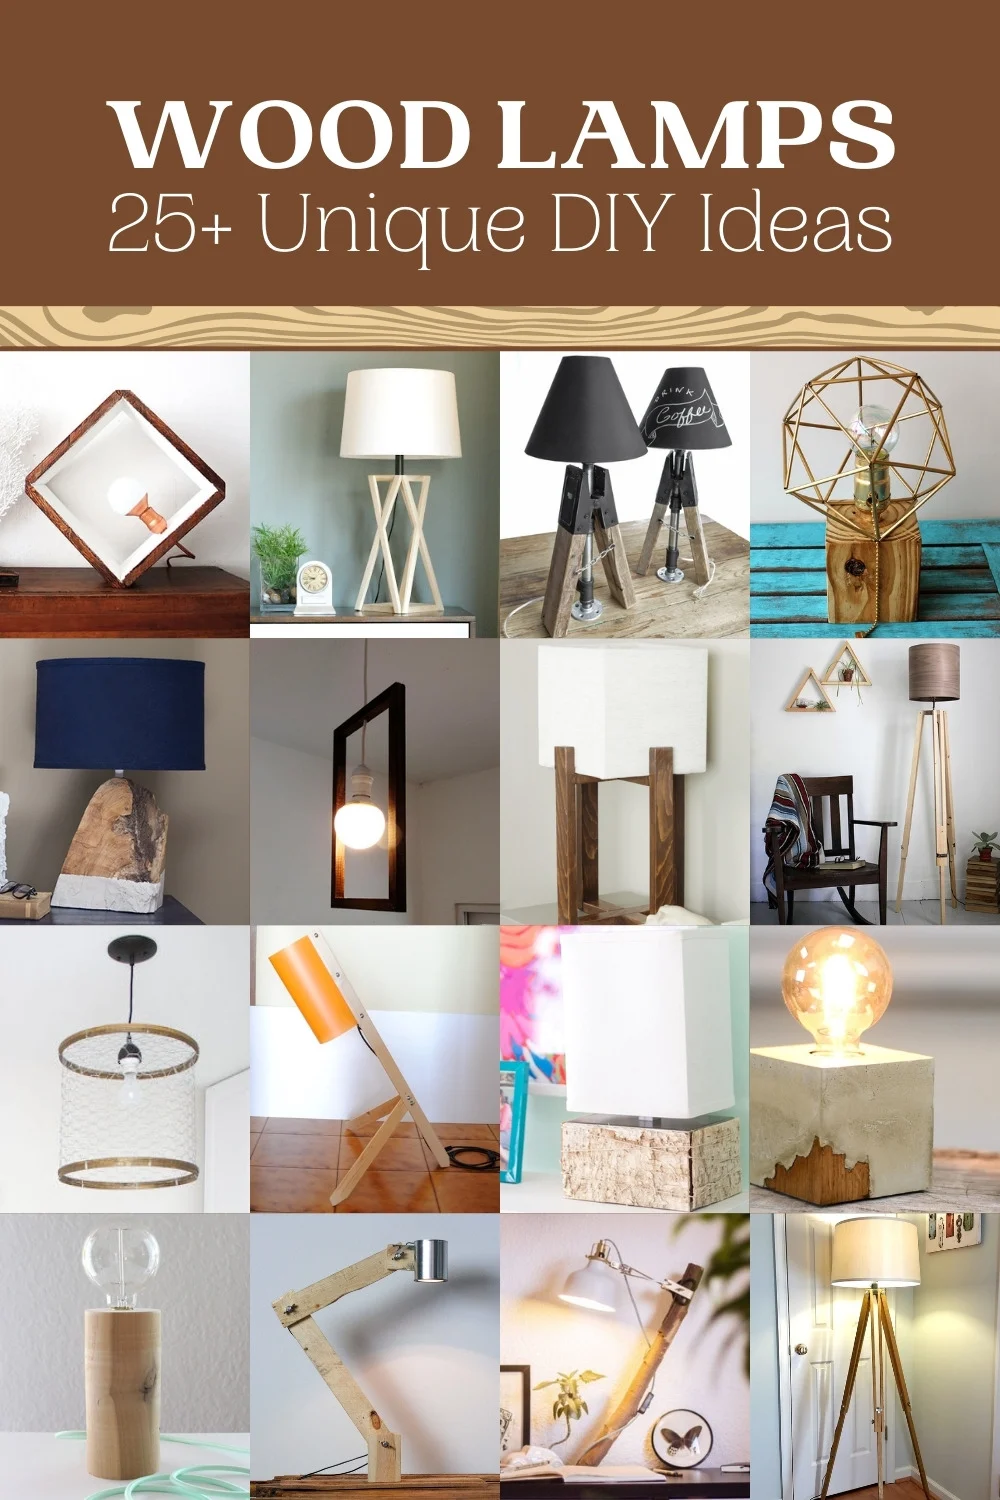 Antecedent Verwoesting Ewell DIY Wood Lamps That Look Amazing in Your Home - DIY Candy